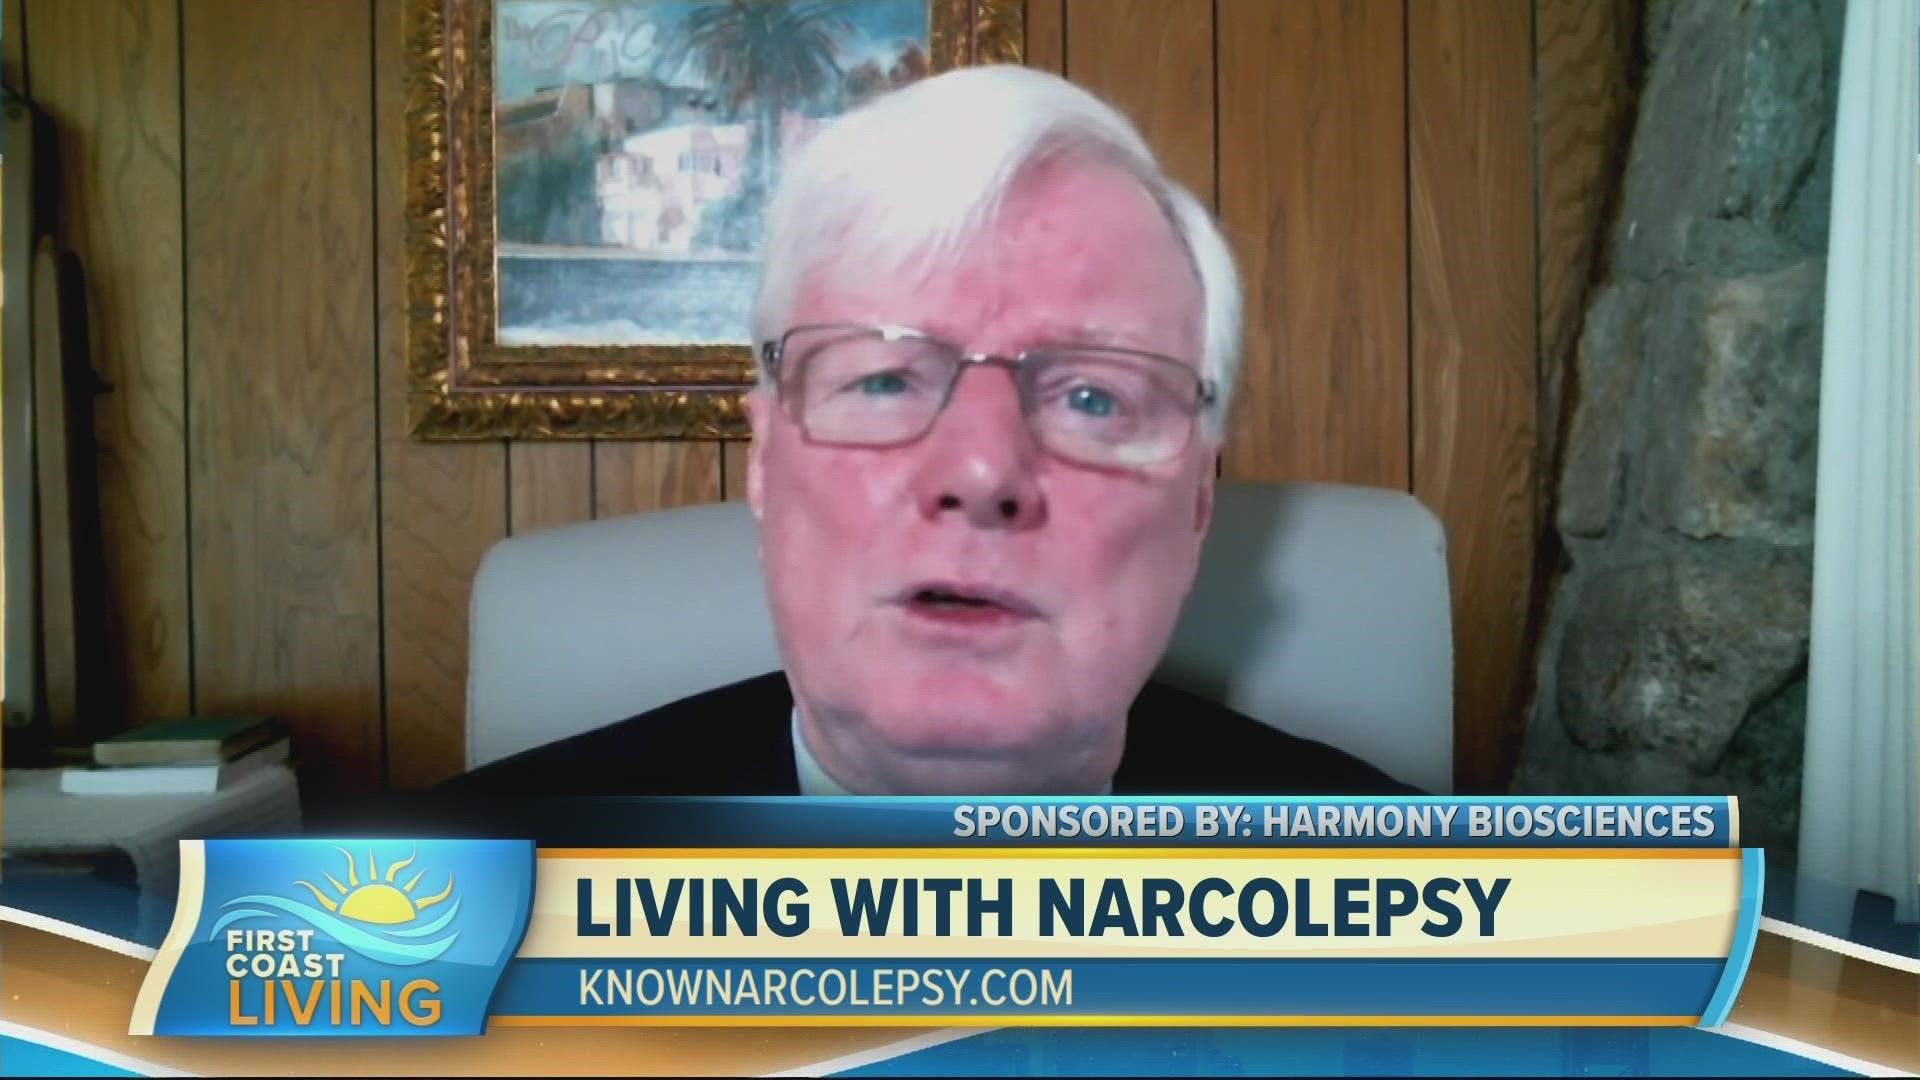 Most folks have the wrong image of what narcolepsy is and its signs and symptoms.